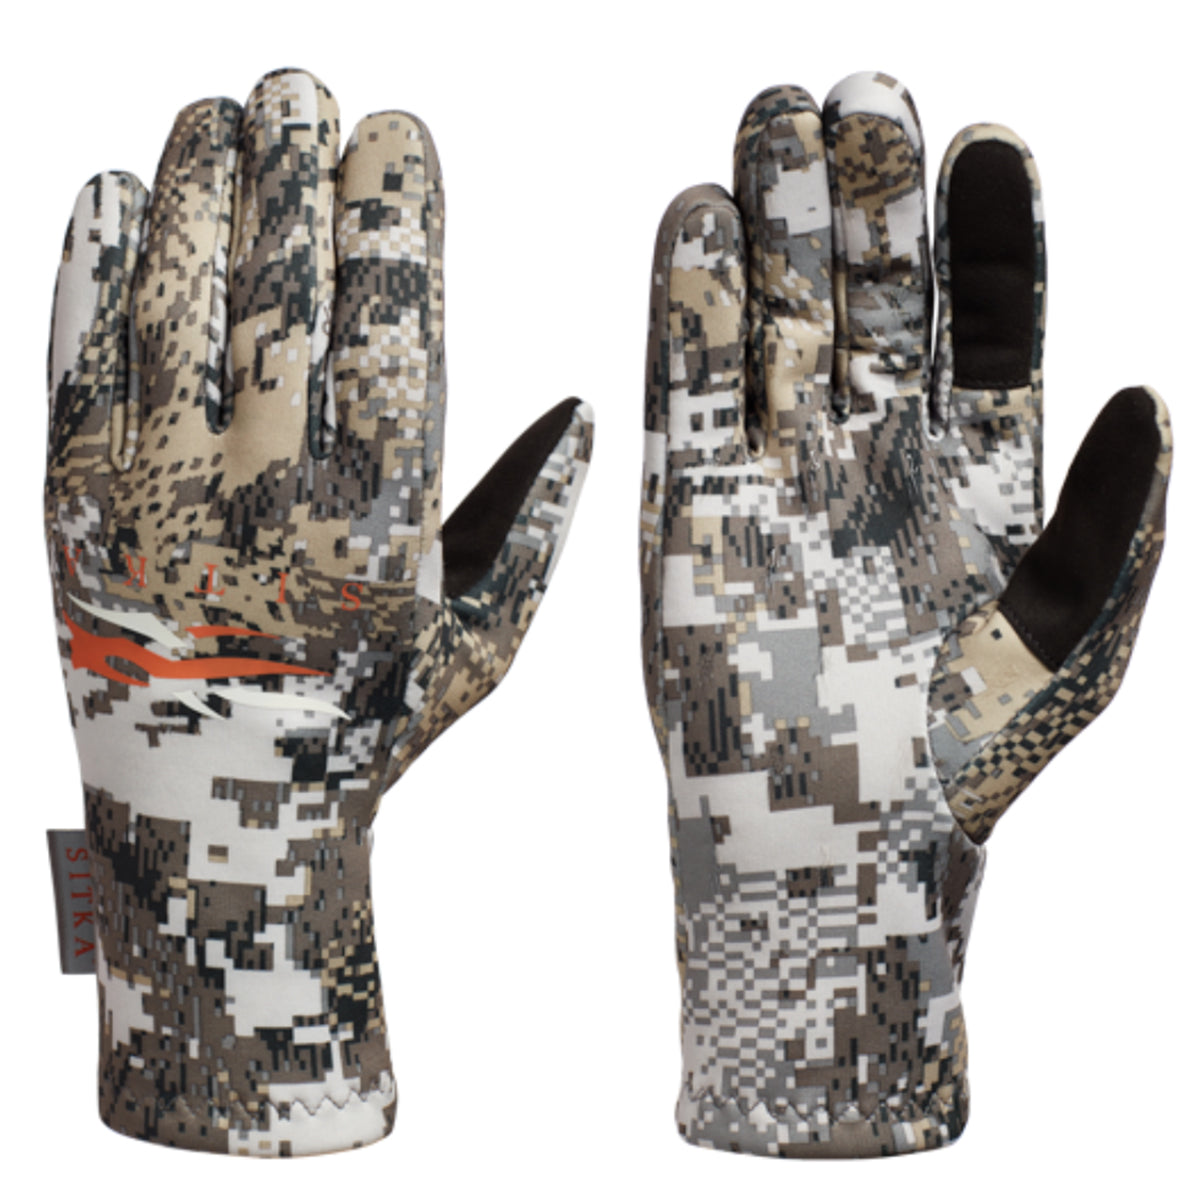 Sitka Women's Traverse Glove in Elevated II by GOHUNT | Sitka - GOHUNT Shop